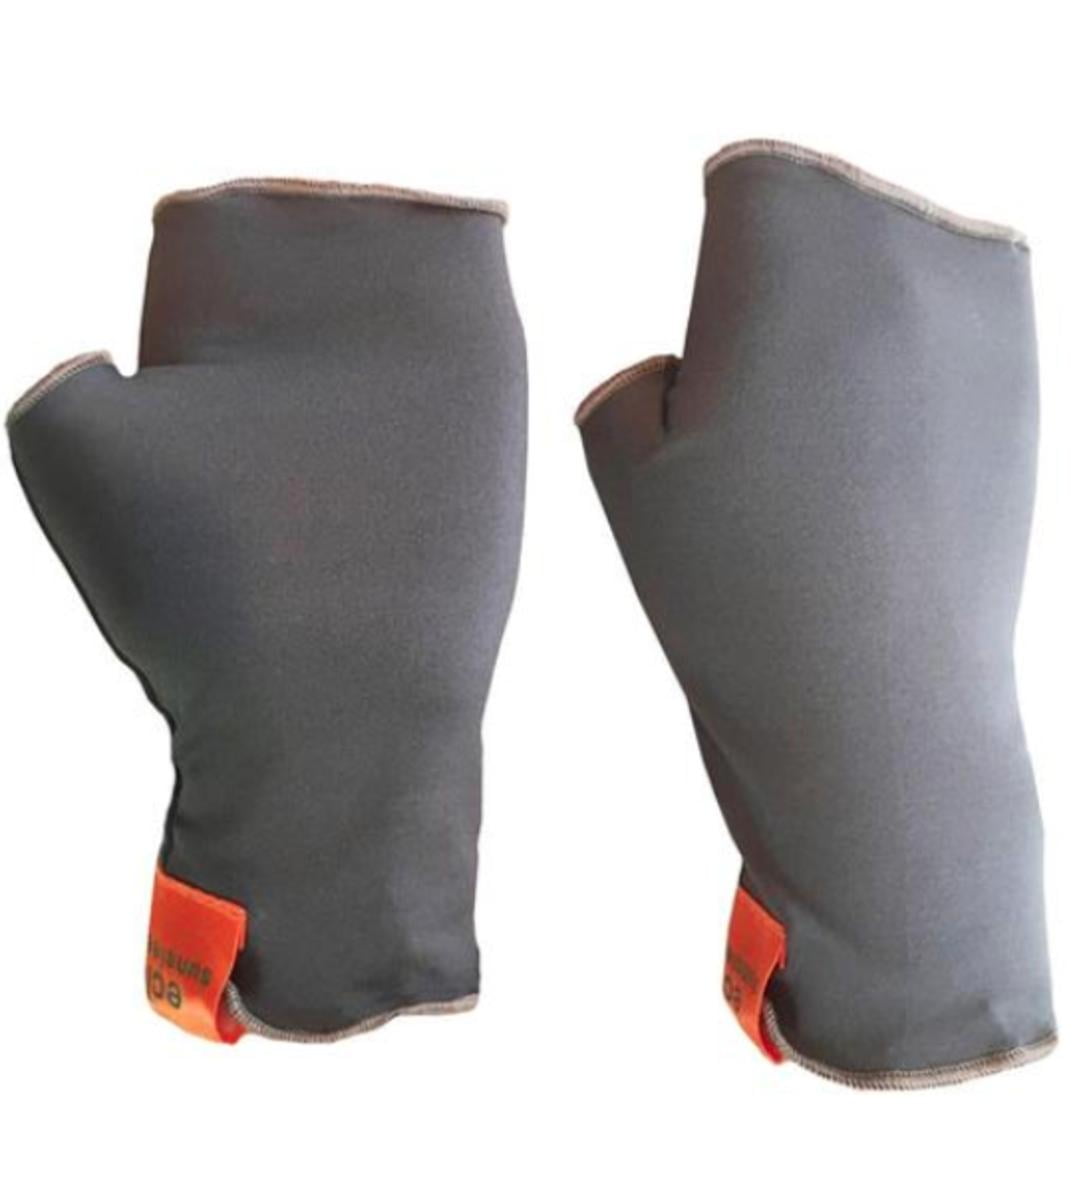 Sun Protection-Pick Color/Size-Free Ship Buff Eclipse Fishing Gloves-UPF 50 